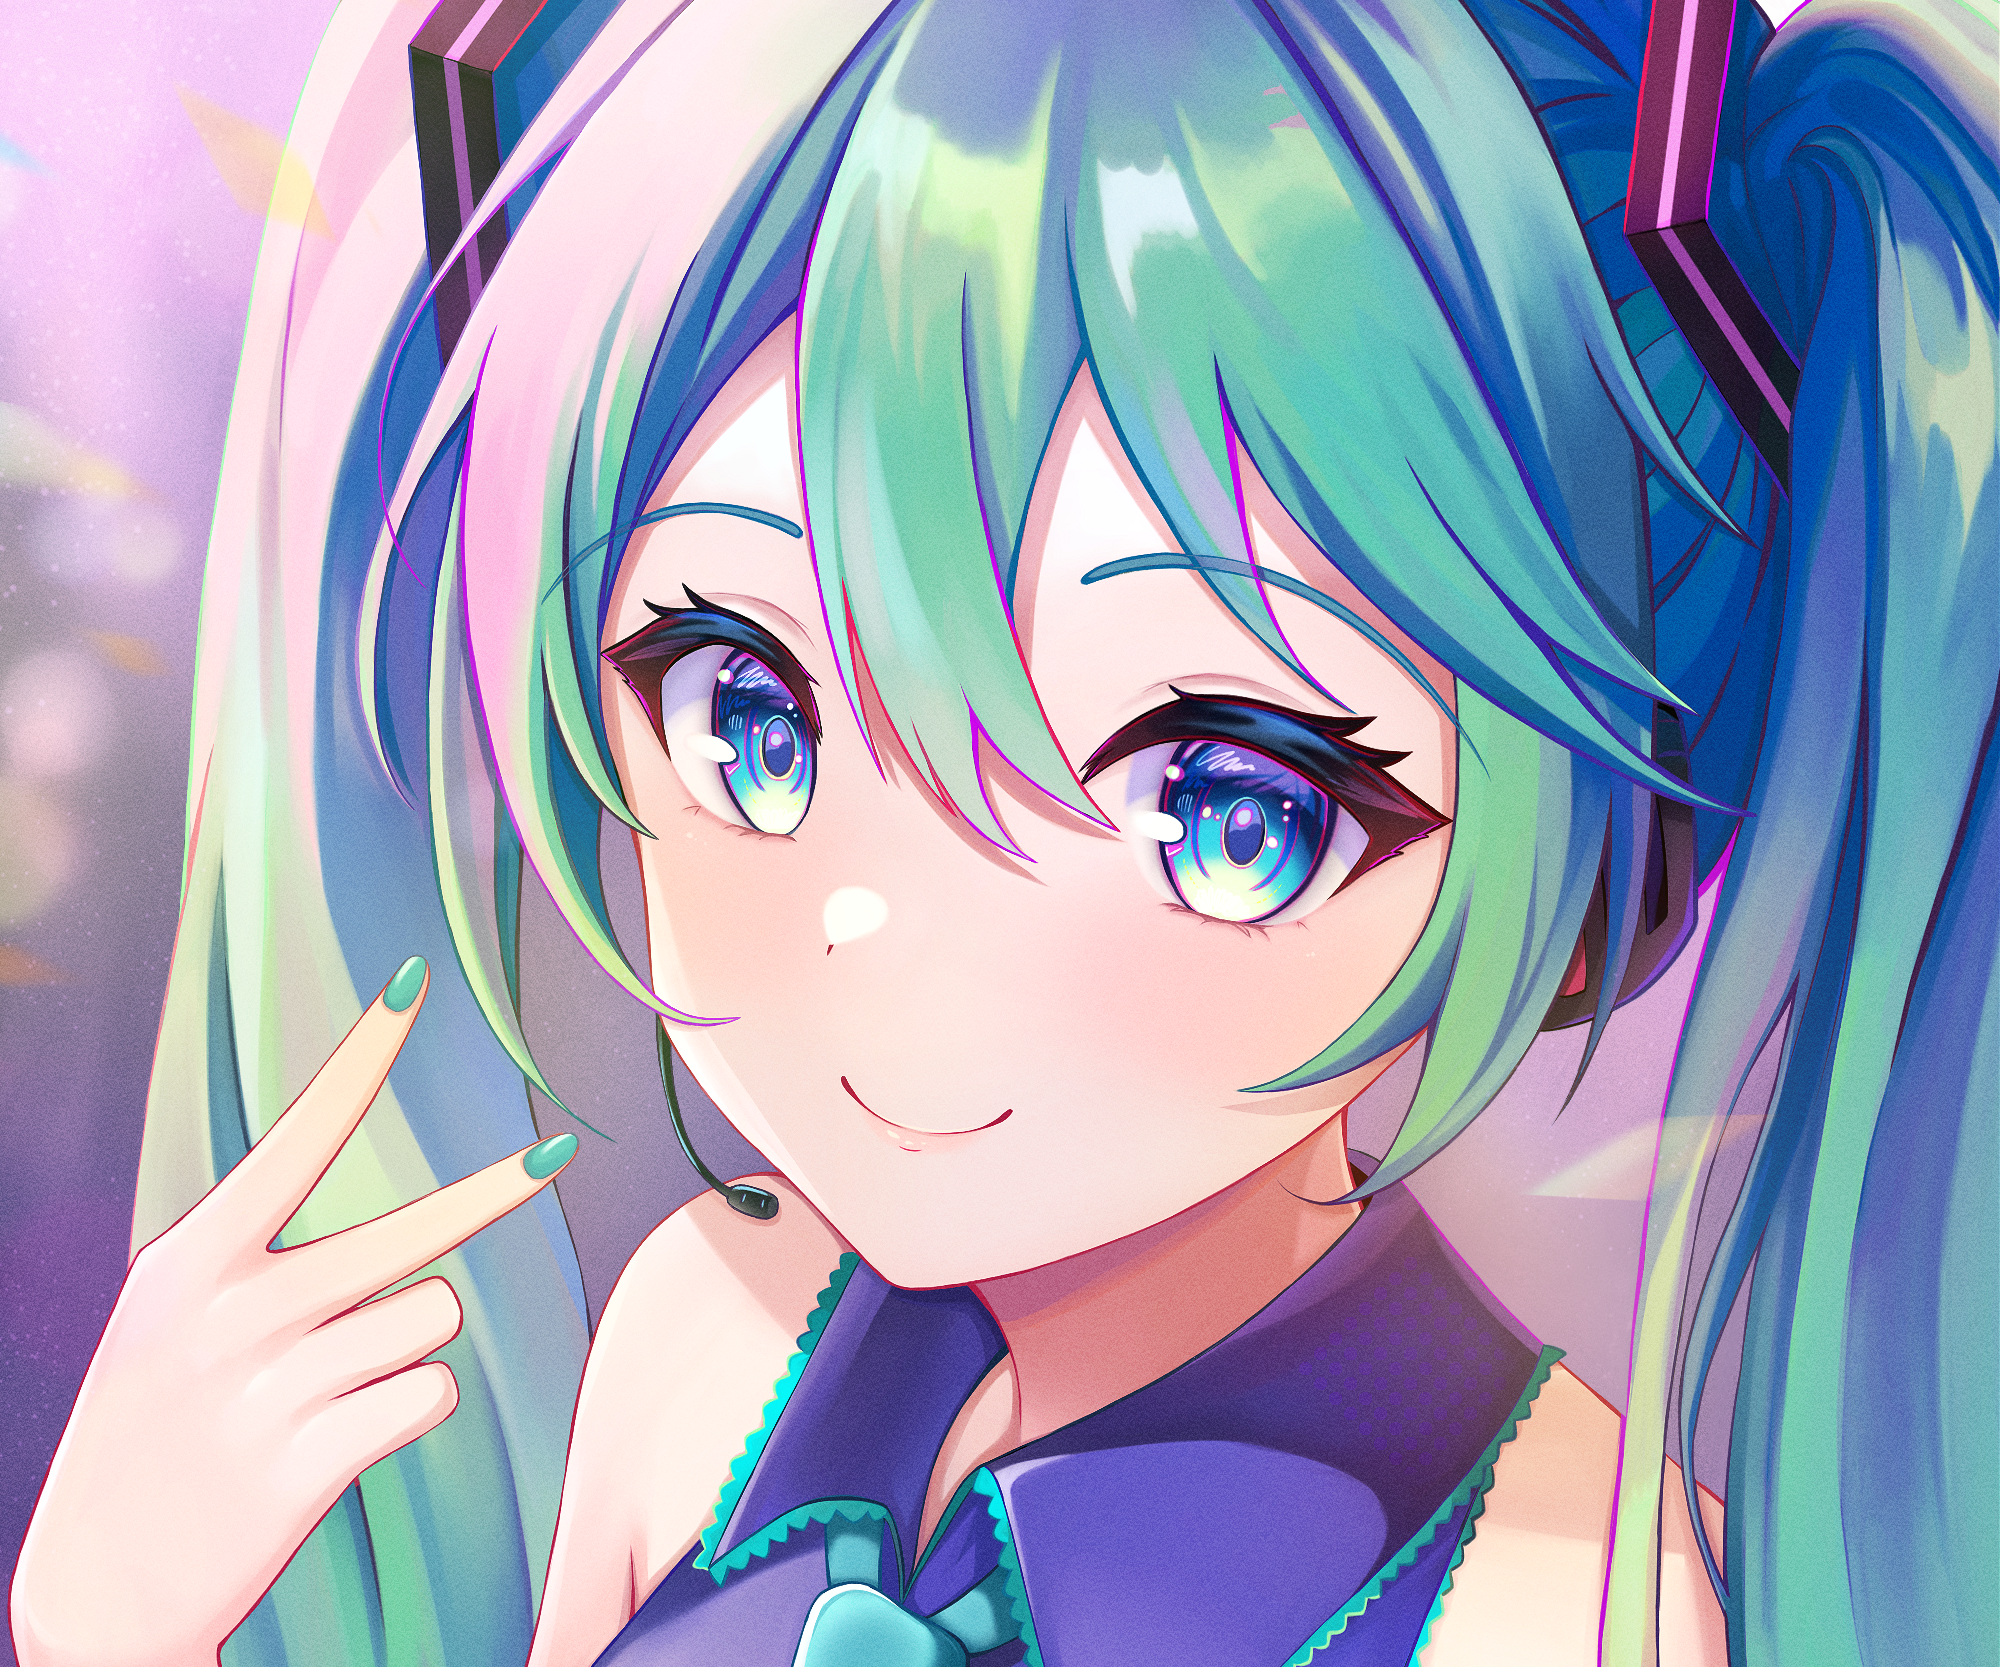 1191878 Vocaloid anime girls Hatsune Miku Gongha smiling anime  vertical  Rare Gallery HD Wallpapers